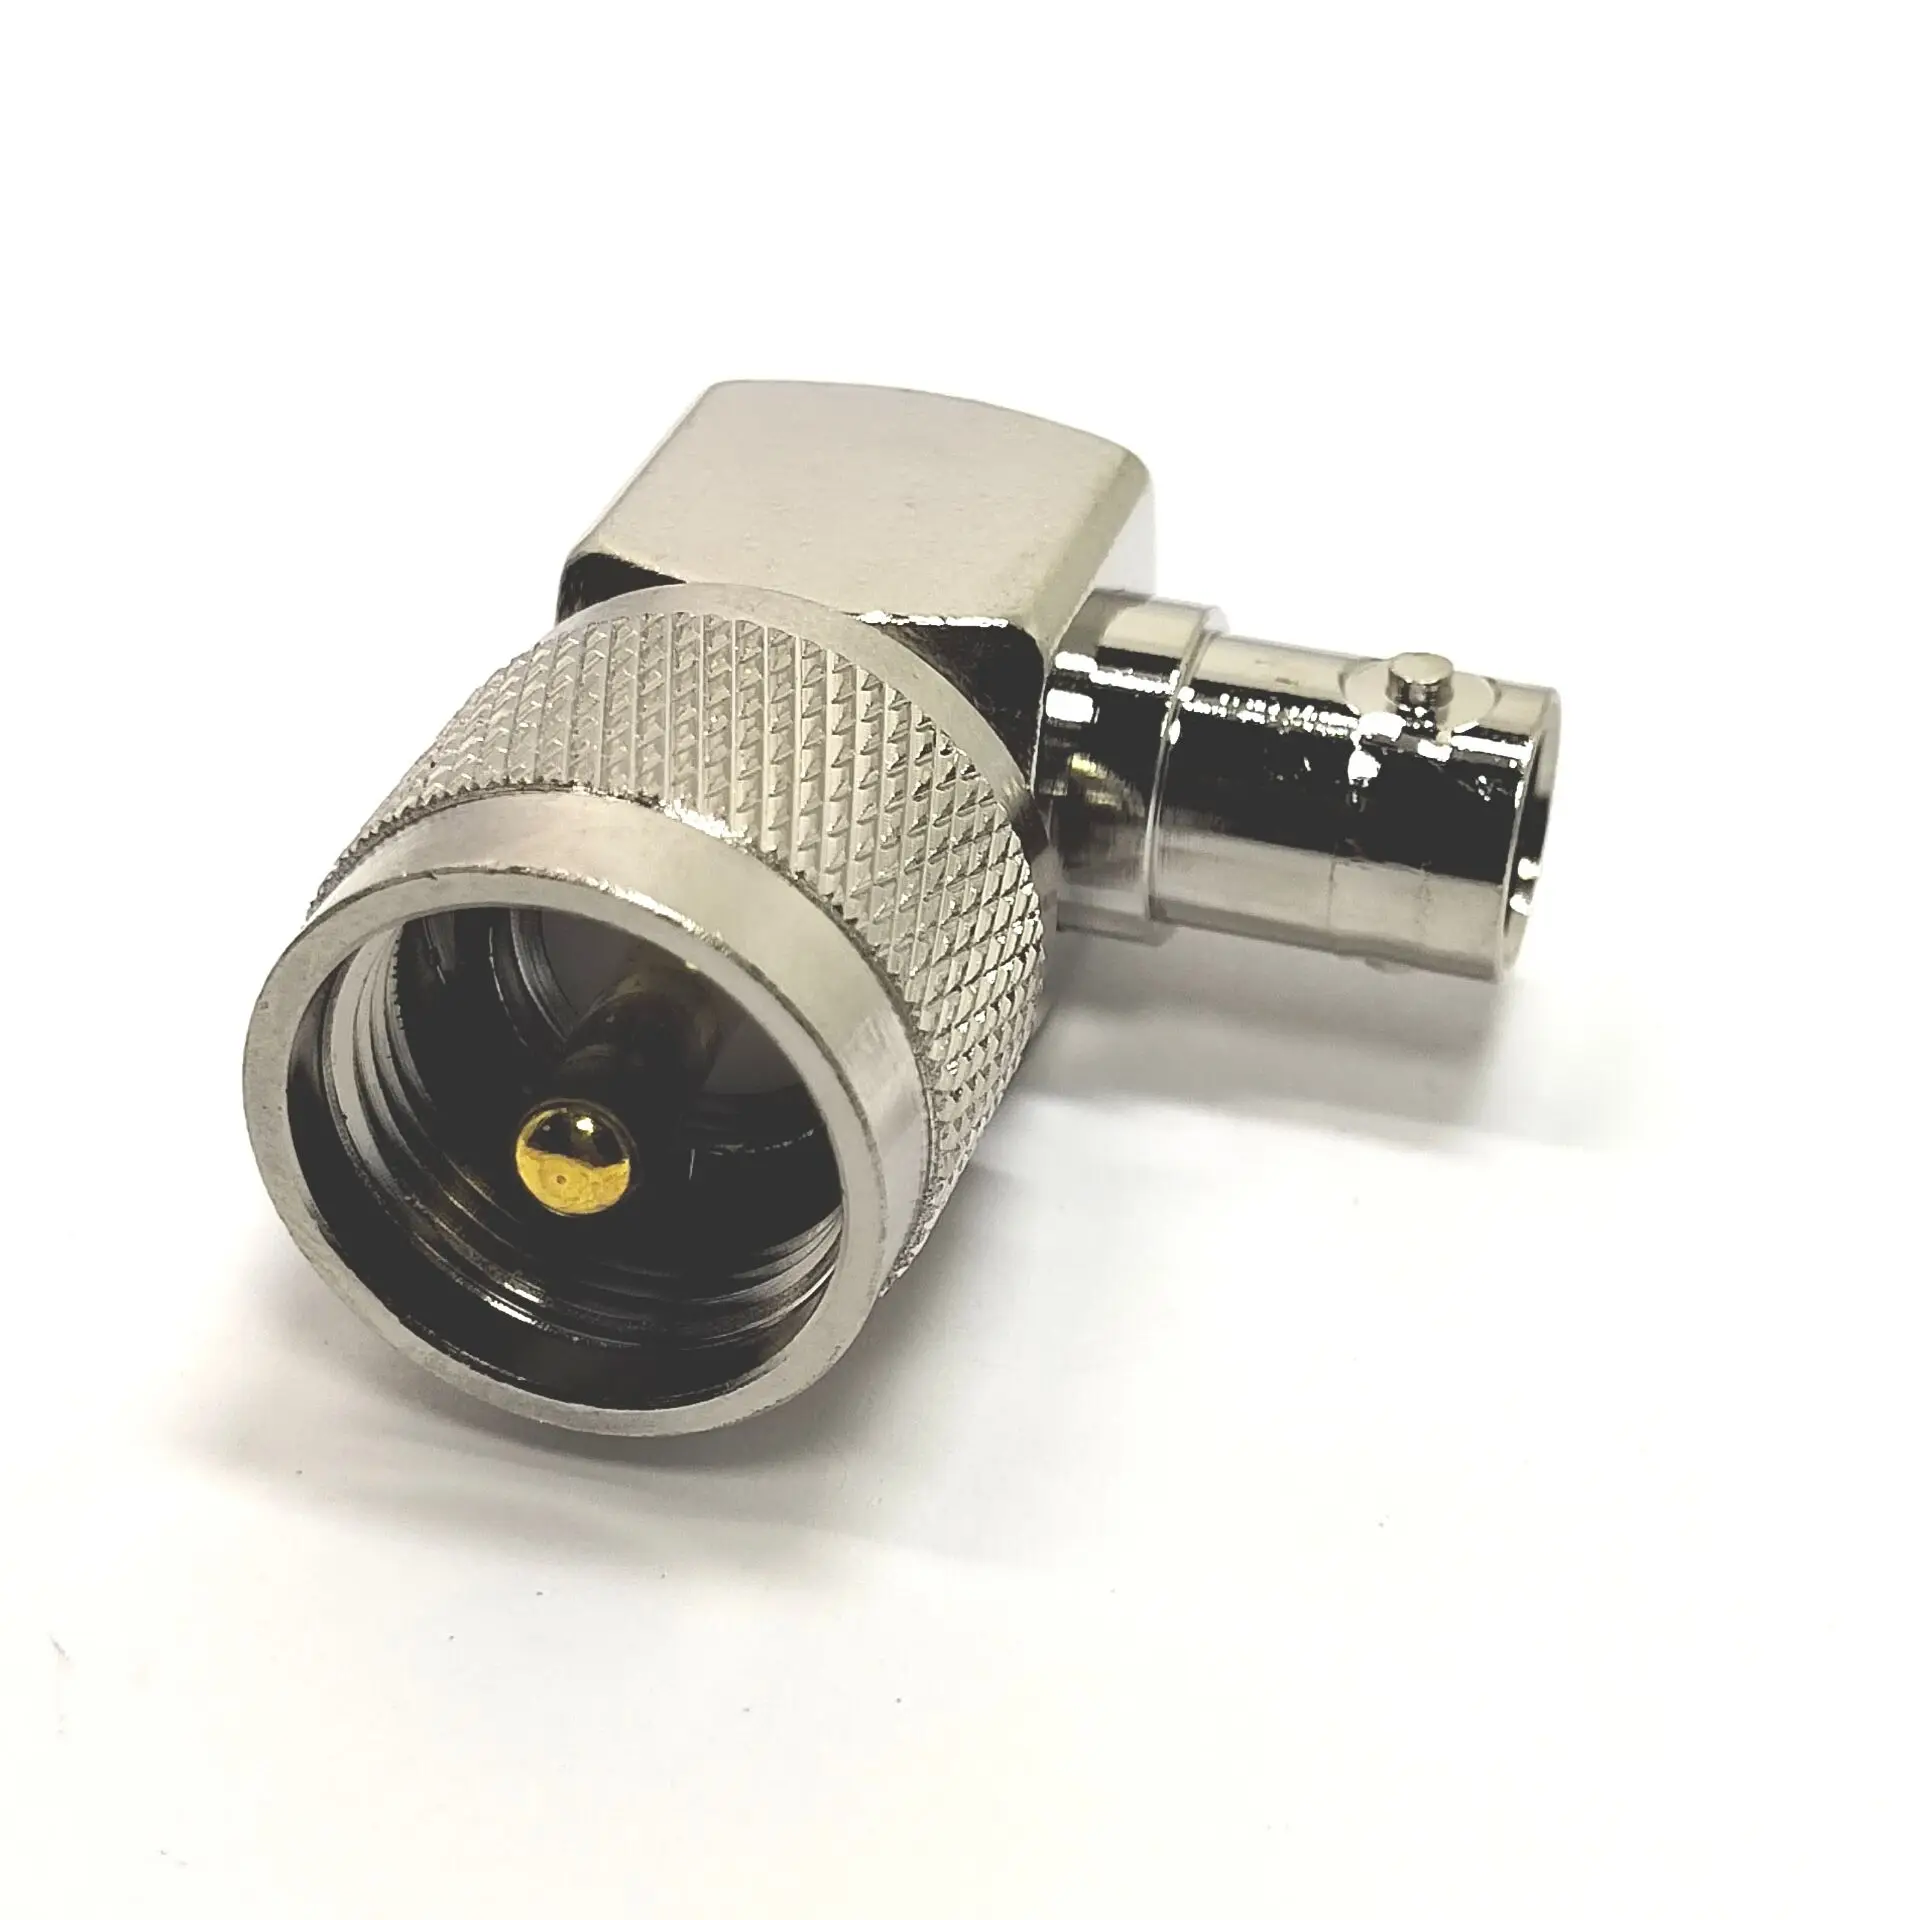 Nickel plated Rf Connector BNC Female To UHF PL259 Male Right Angle Adapter in stock factory